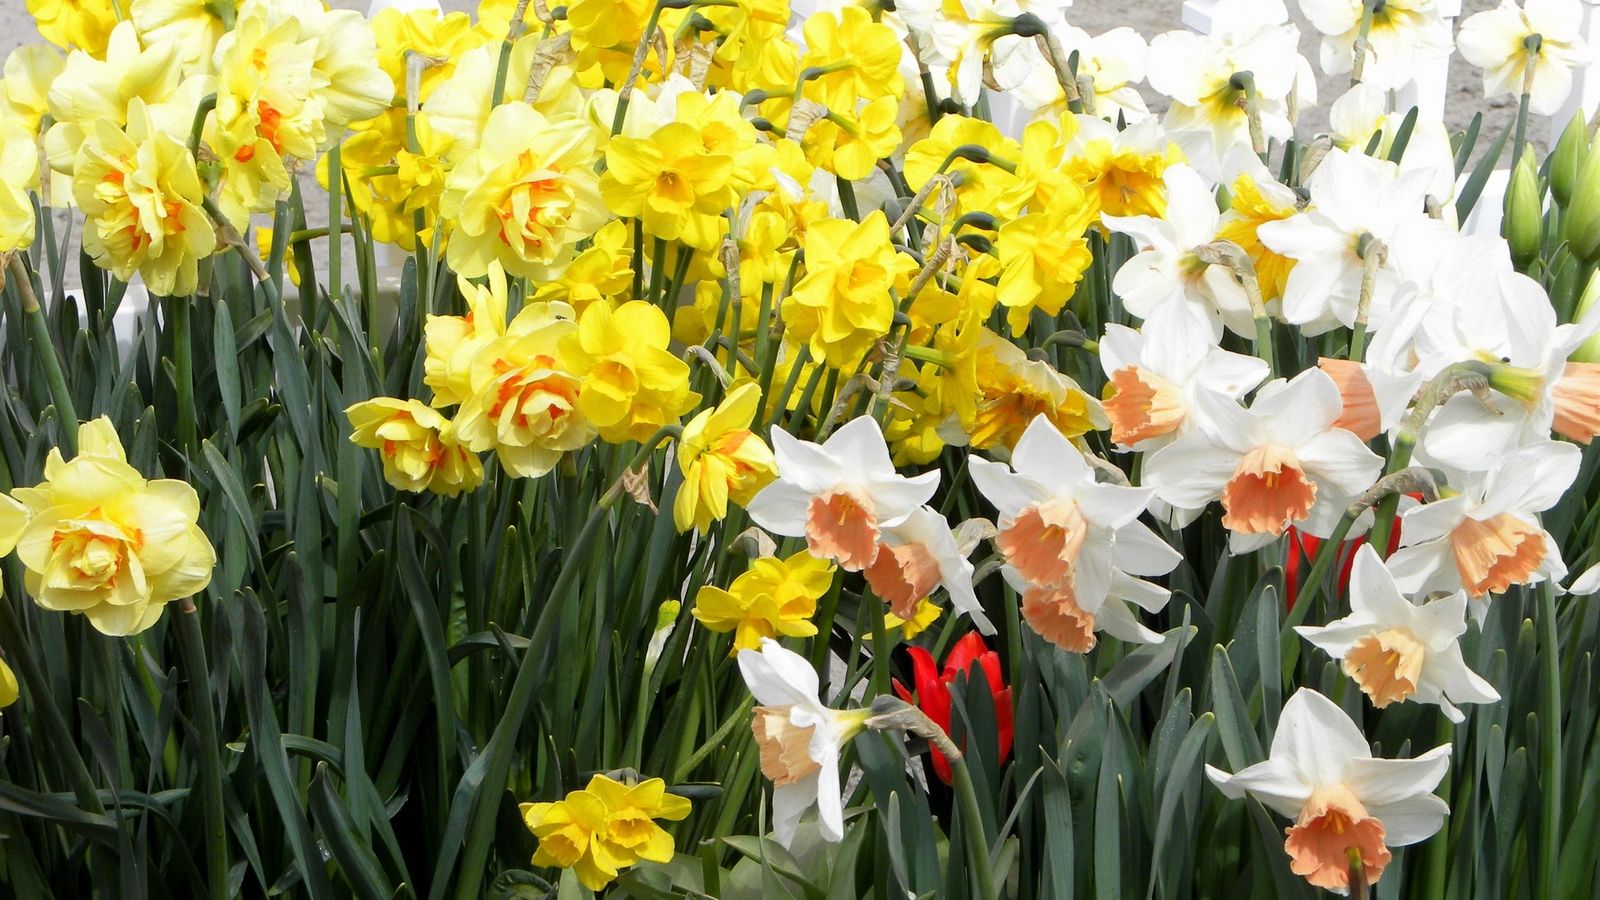 Download wallpaper 1600x900 daffodils, flowers, white, yellow